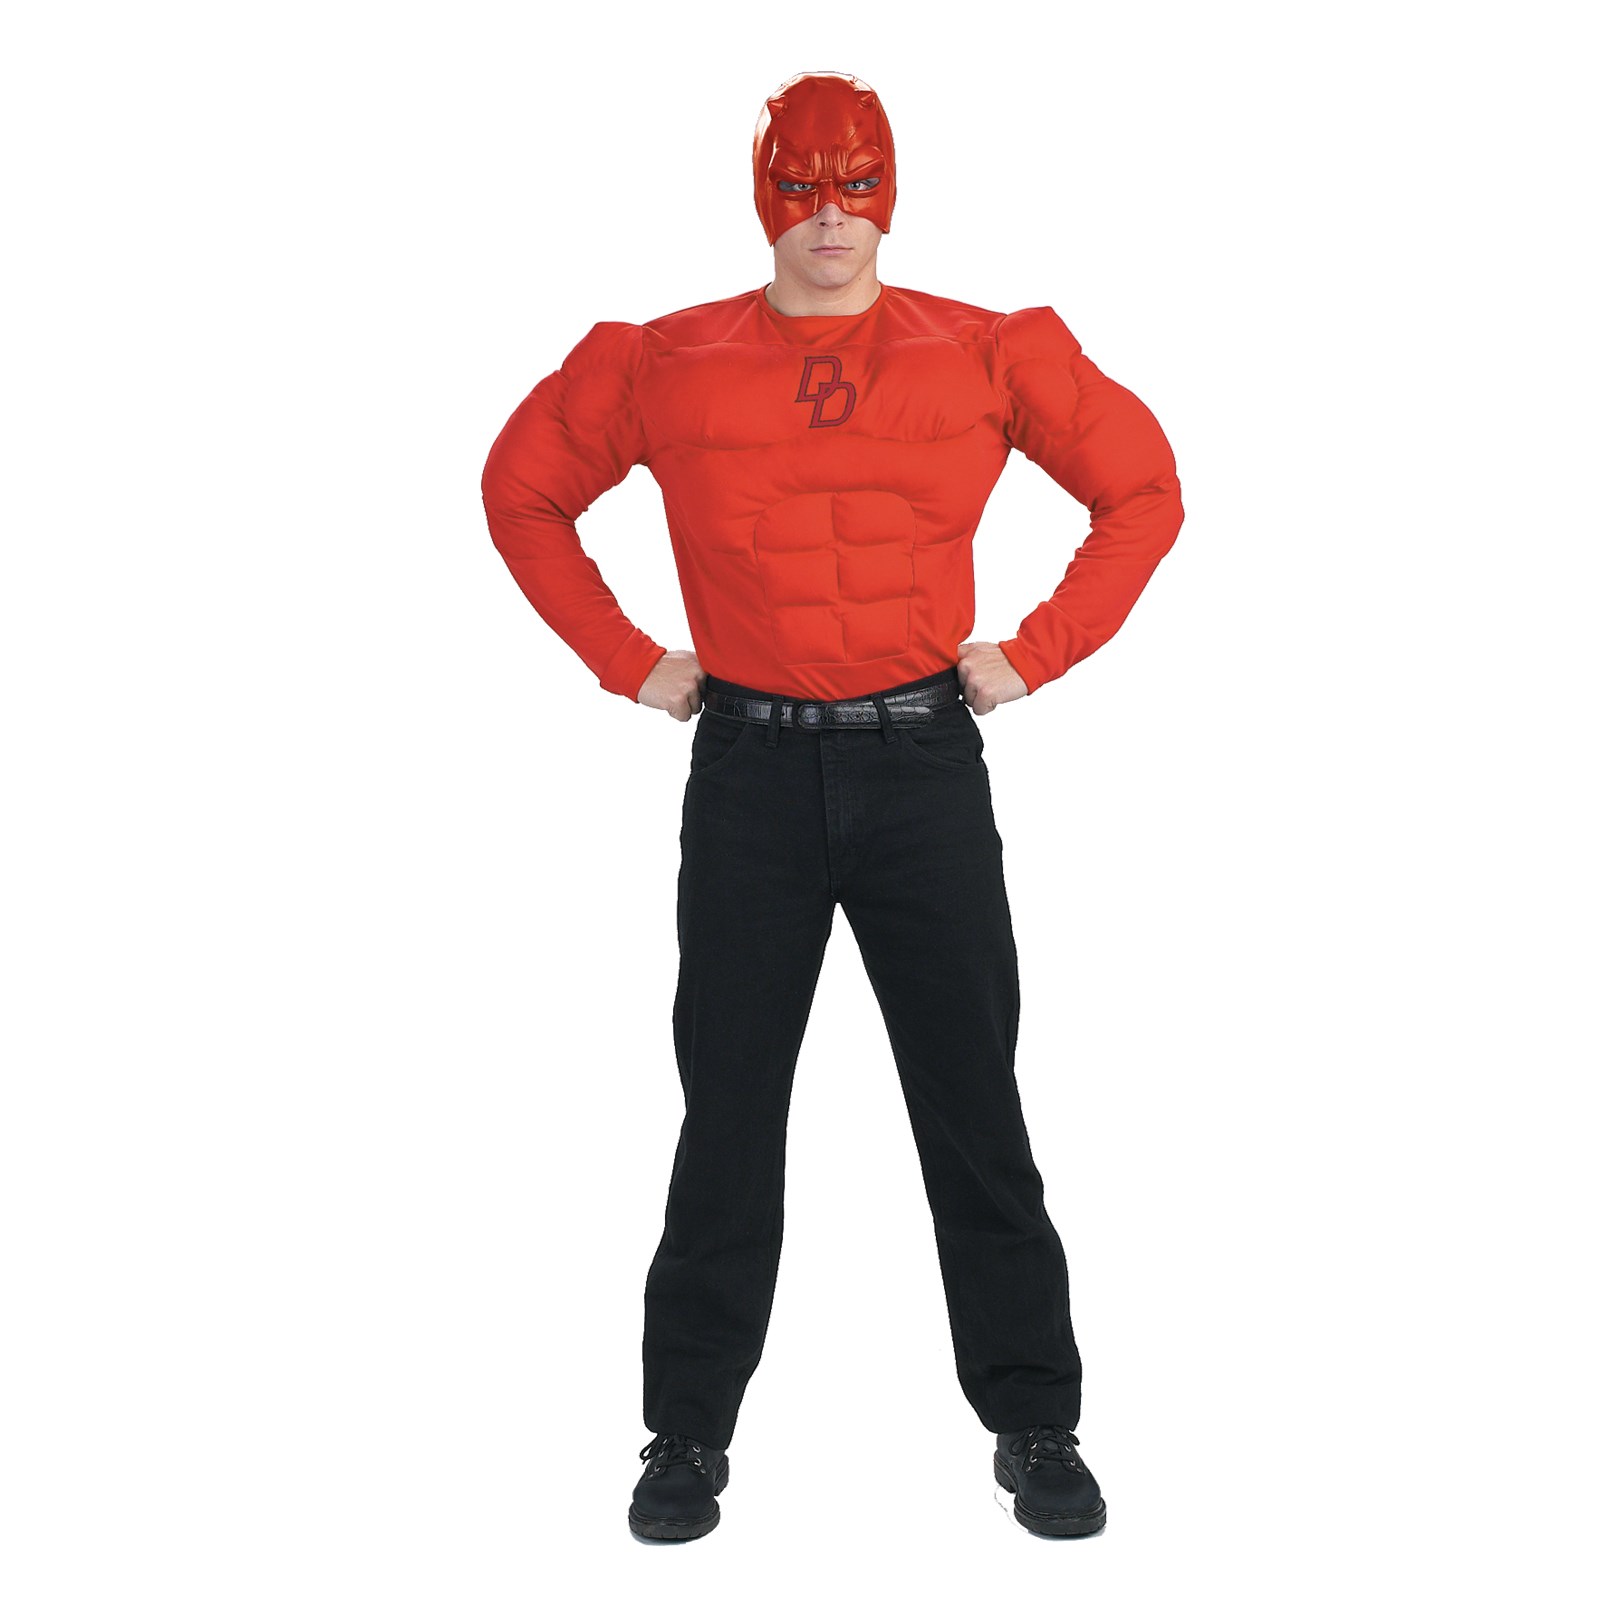 Daredevil Muscle Top With Mask Adult